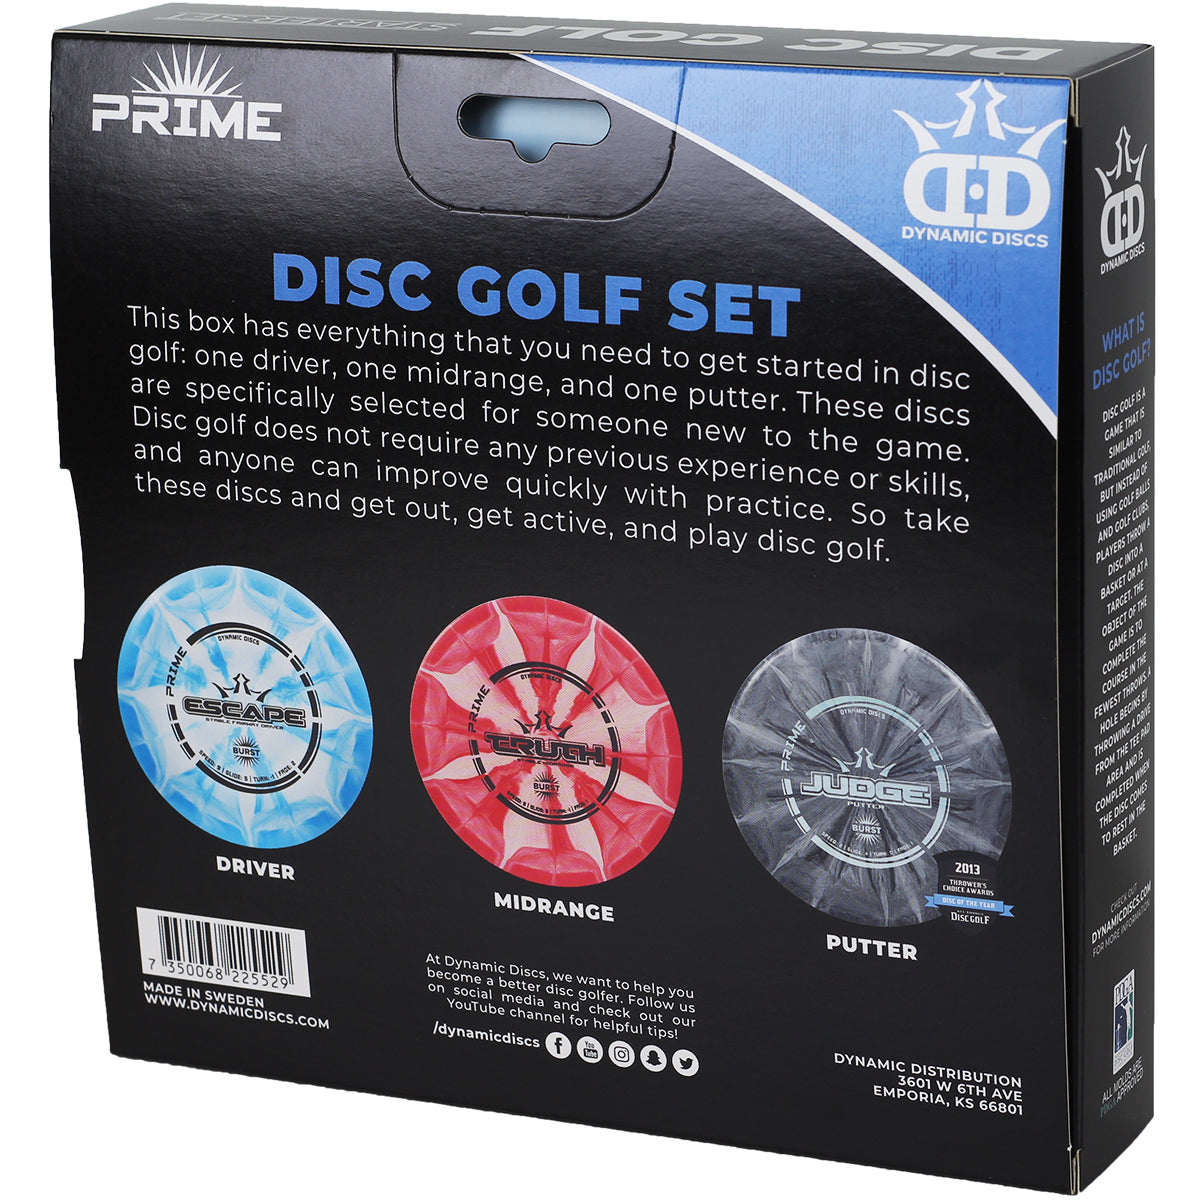 Latitude 64°  First-class disc golf products from Sweden